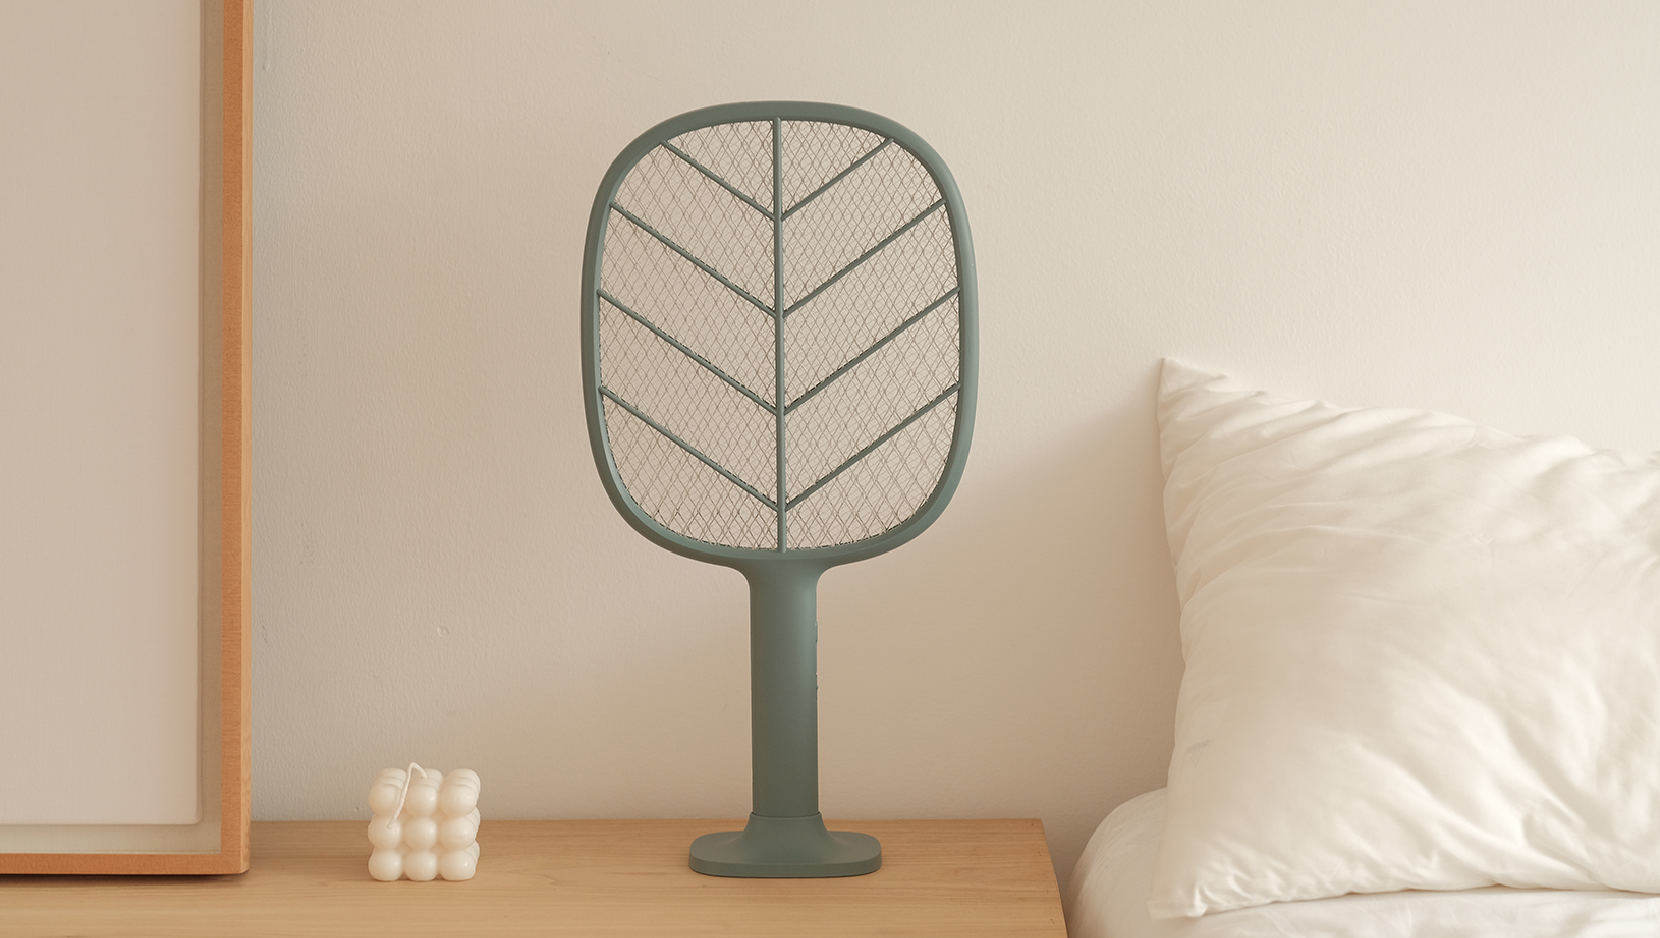 P2-Electric Mosquito Swatter images